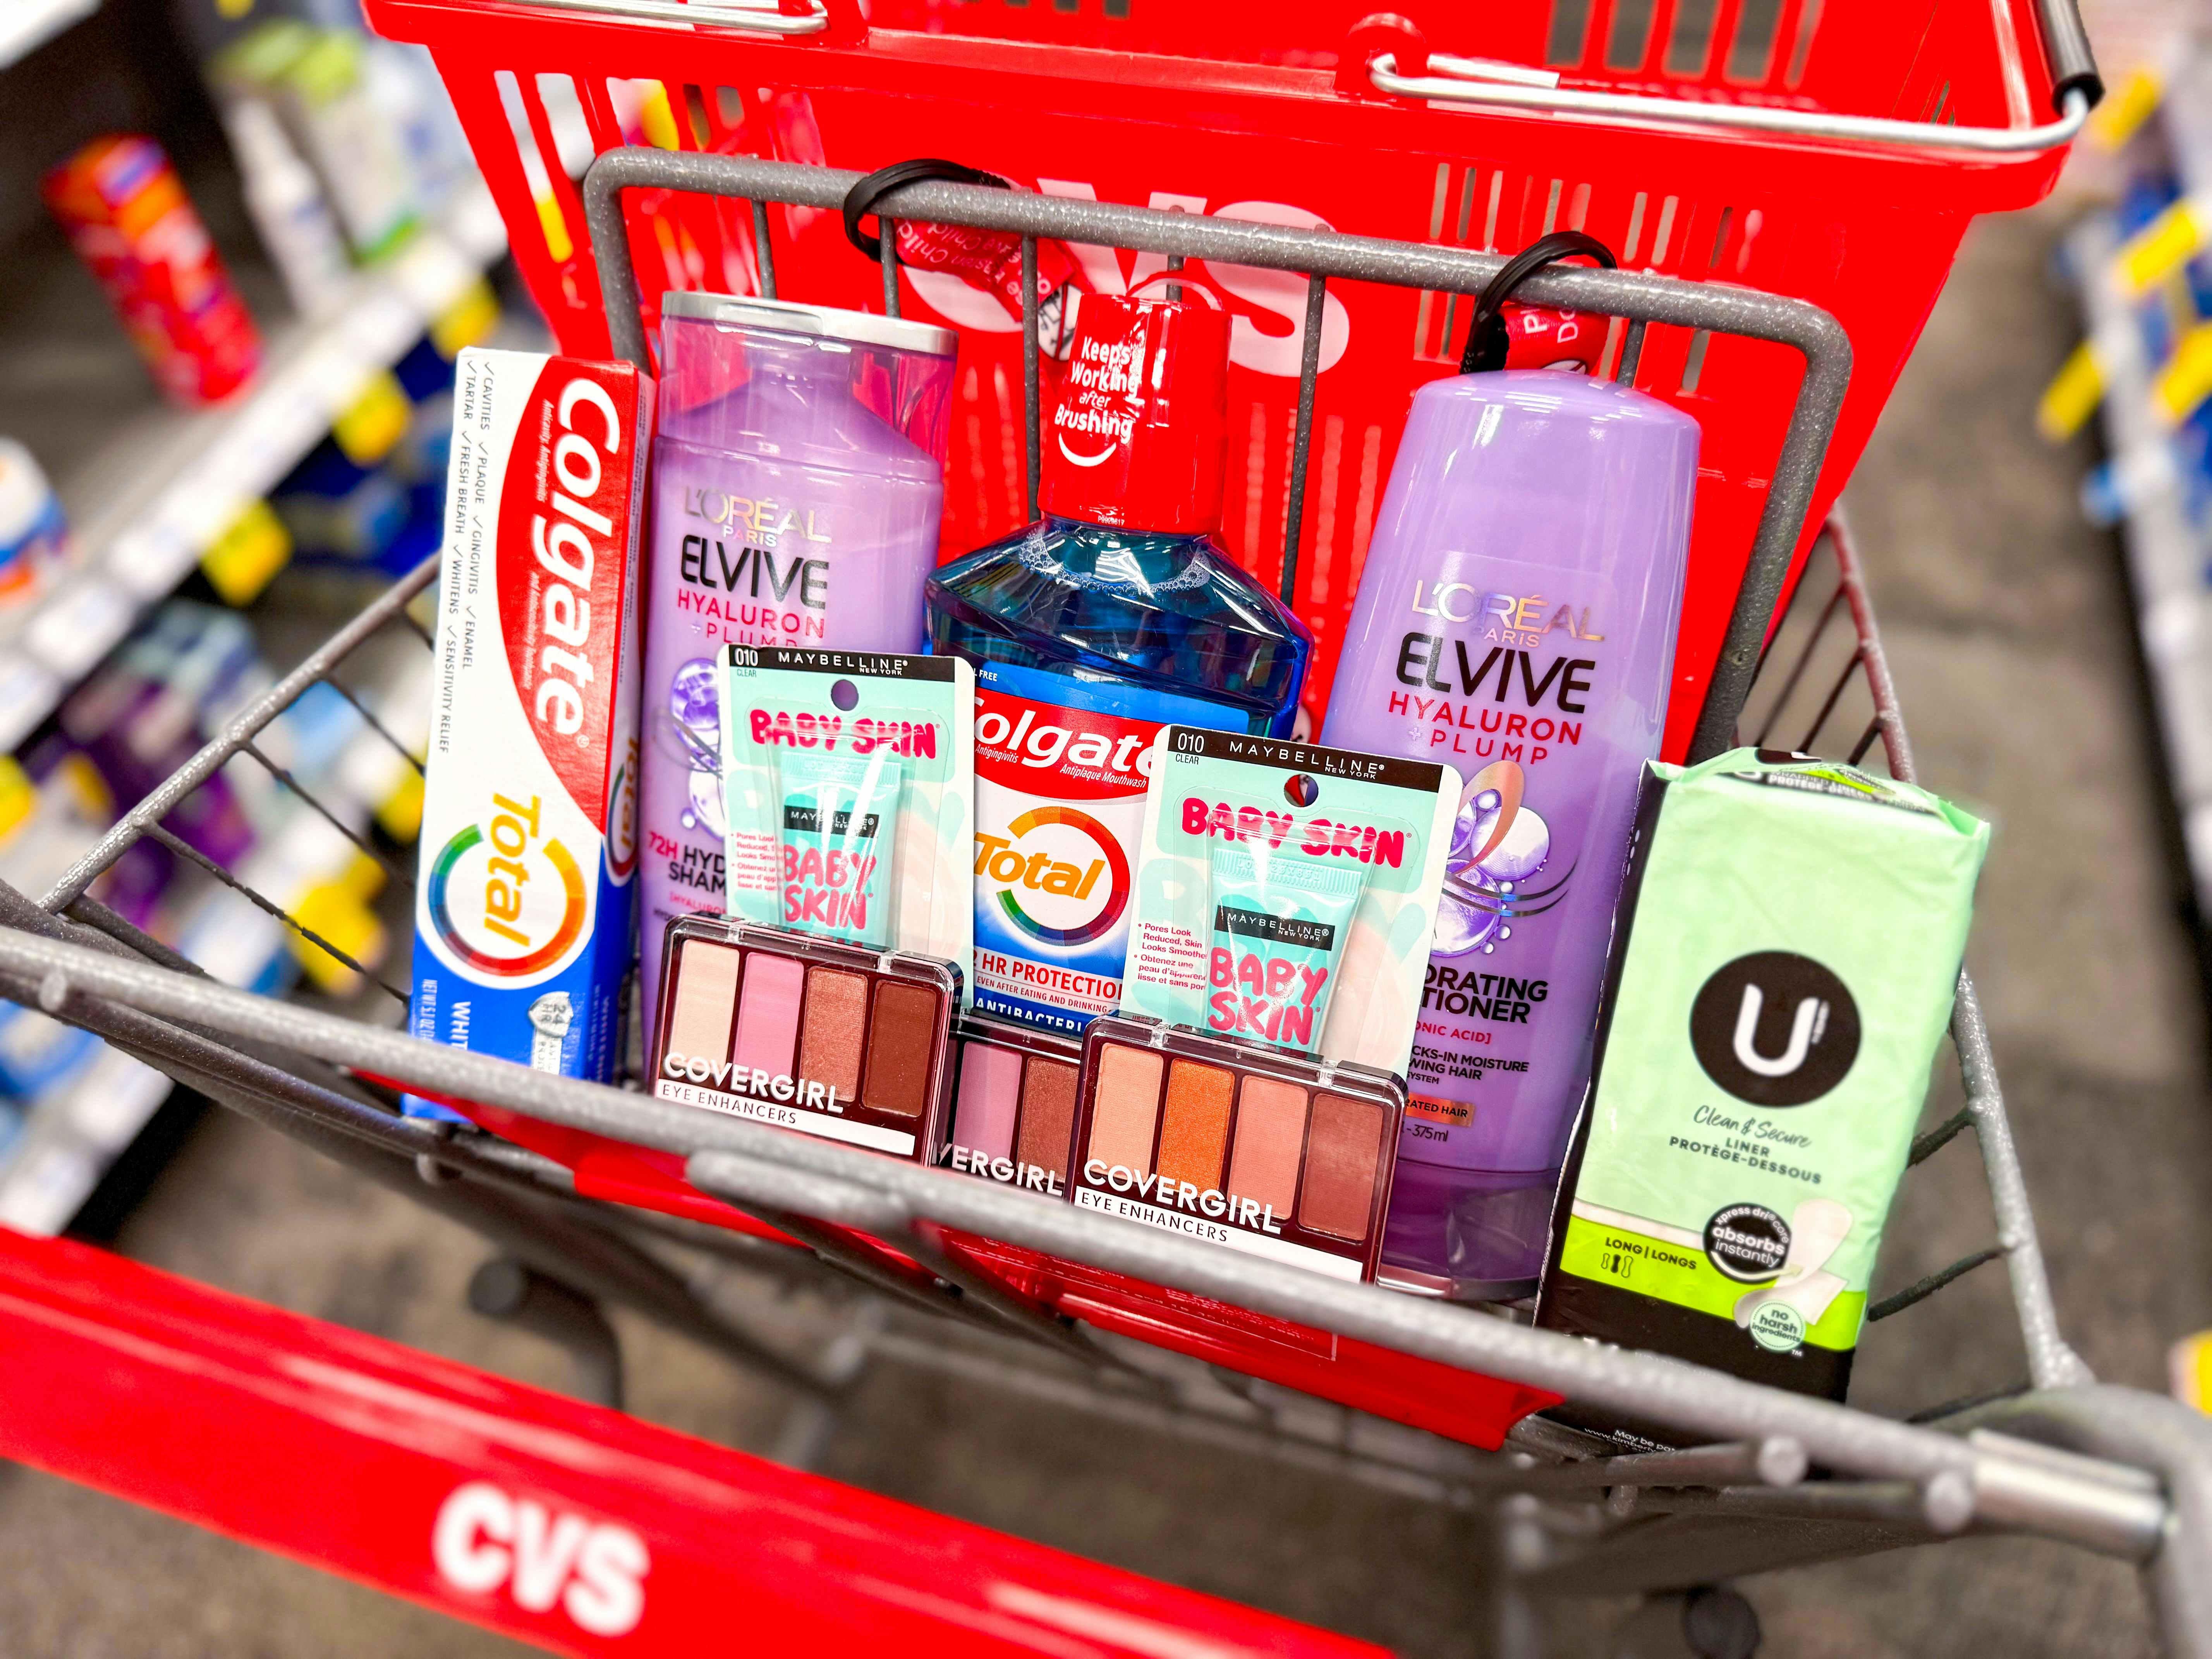 11 Freebies With a $3.63 Moneymaker Shopping Haul at CVS